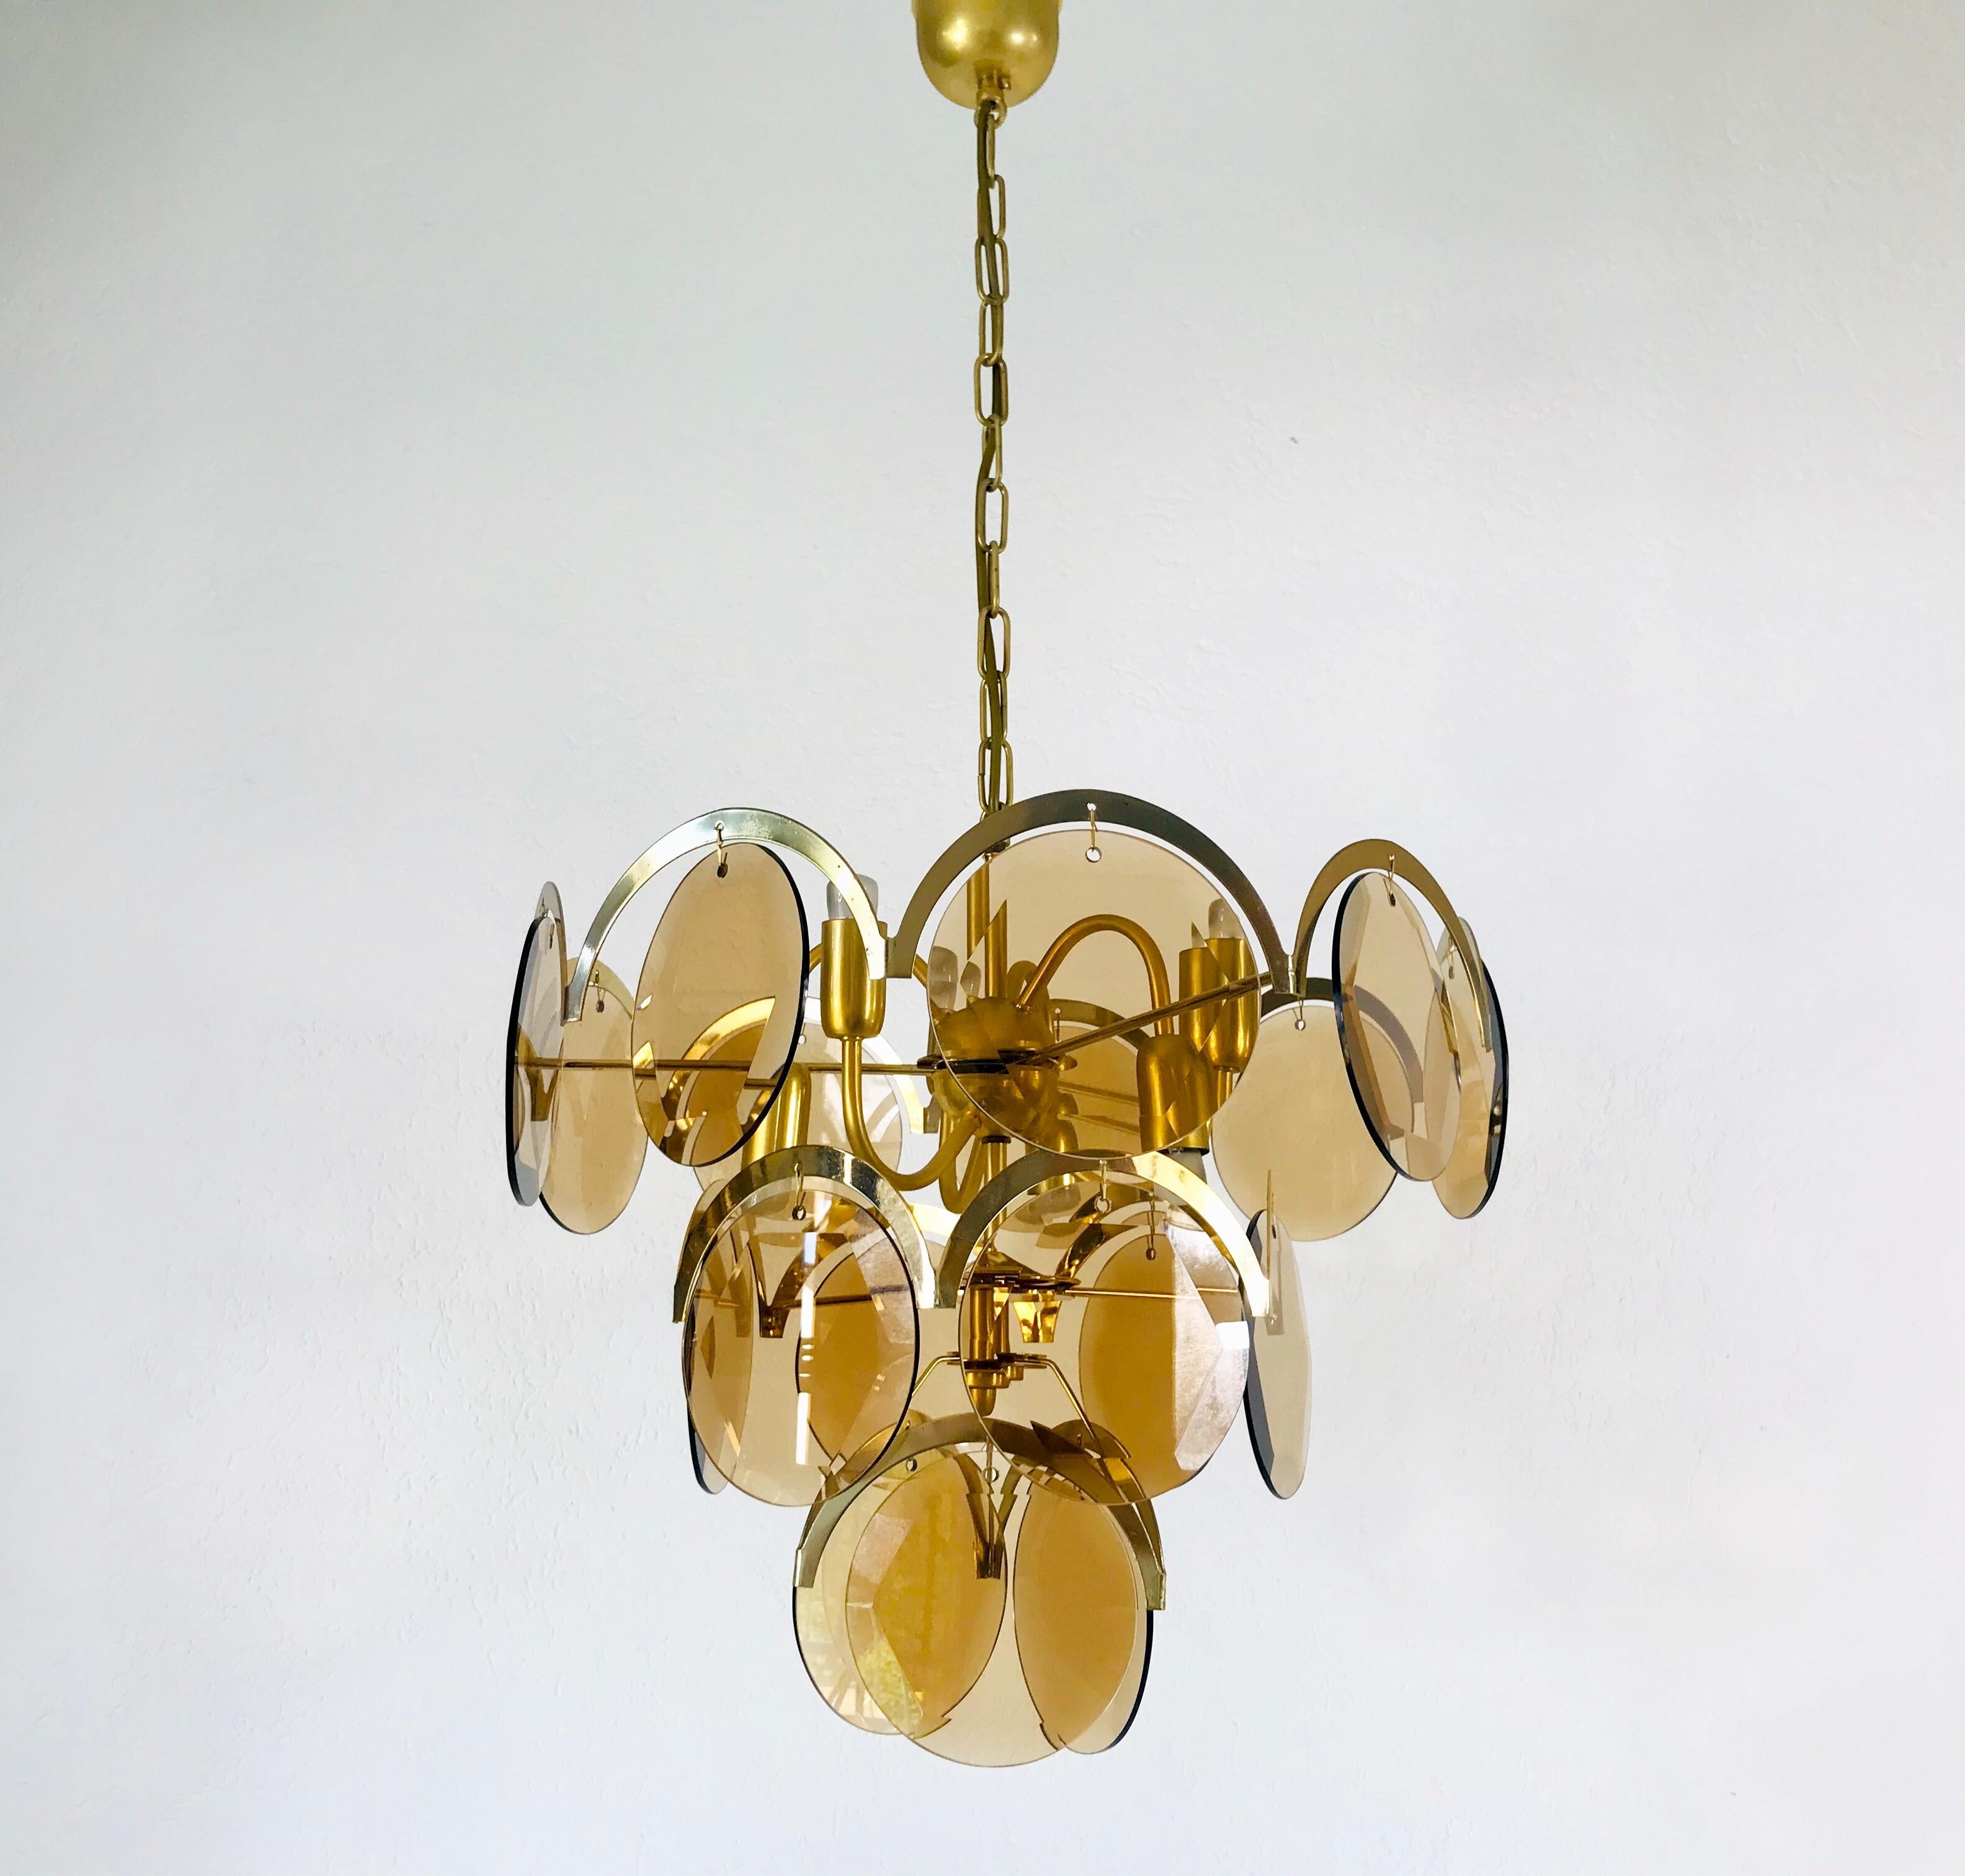 Midcentury Three-Tier Brass and Glass Chandelier by Vistosi, 1960s For Sale 4